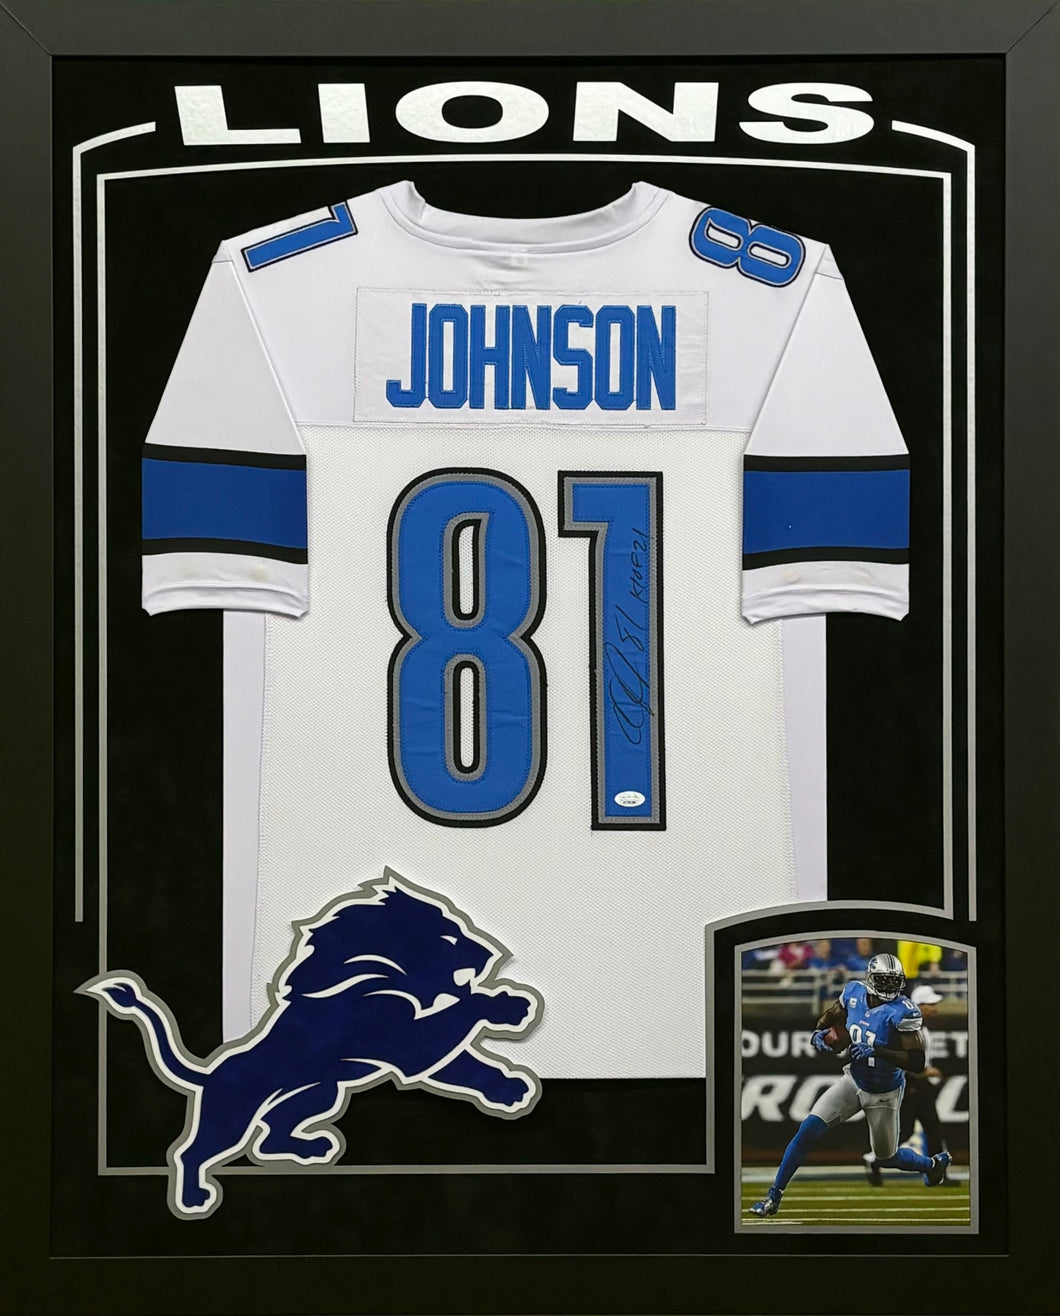 Detroit Lions Calvin Johnson Signed White Jersey with HOF 21 Inscription Framed & Suede Matted with XL 3D Logo & Team Name Cutout JSA COA